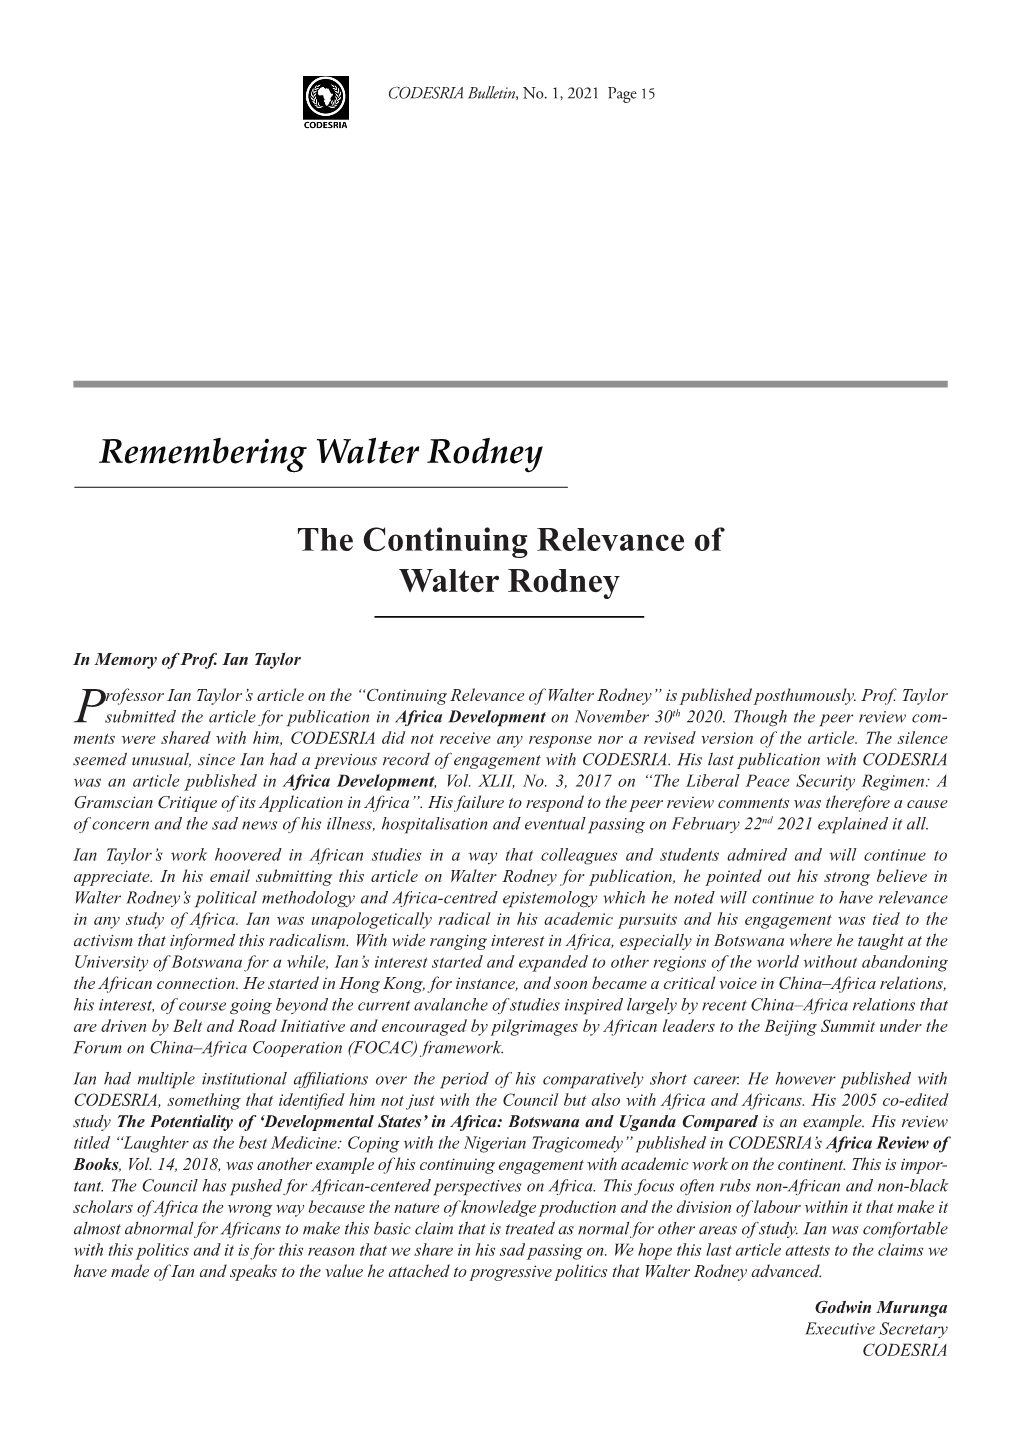 The Continuing Relevance of Walter Rodney